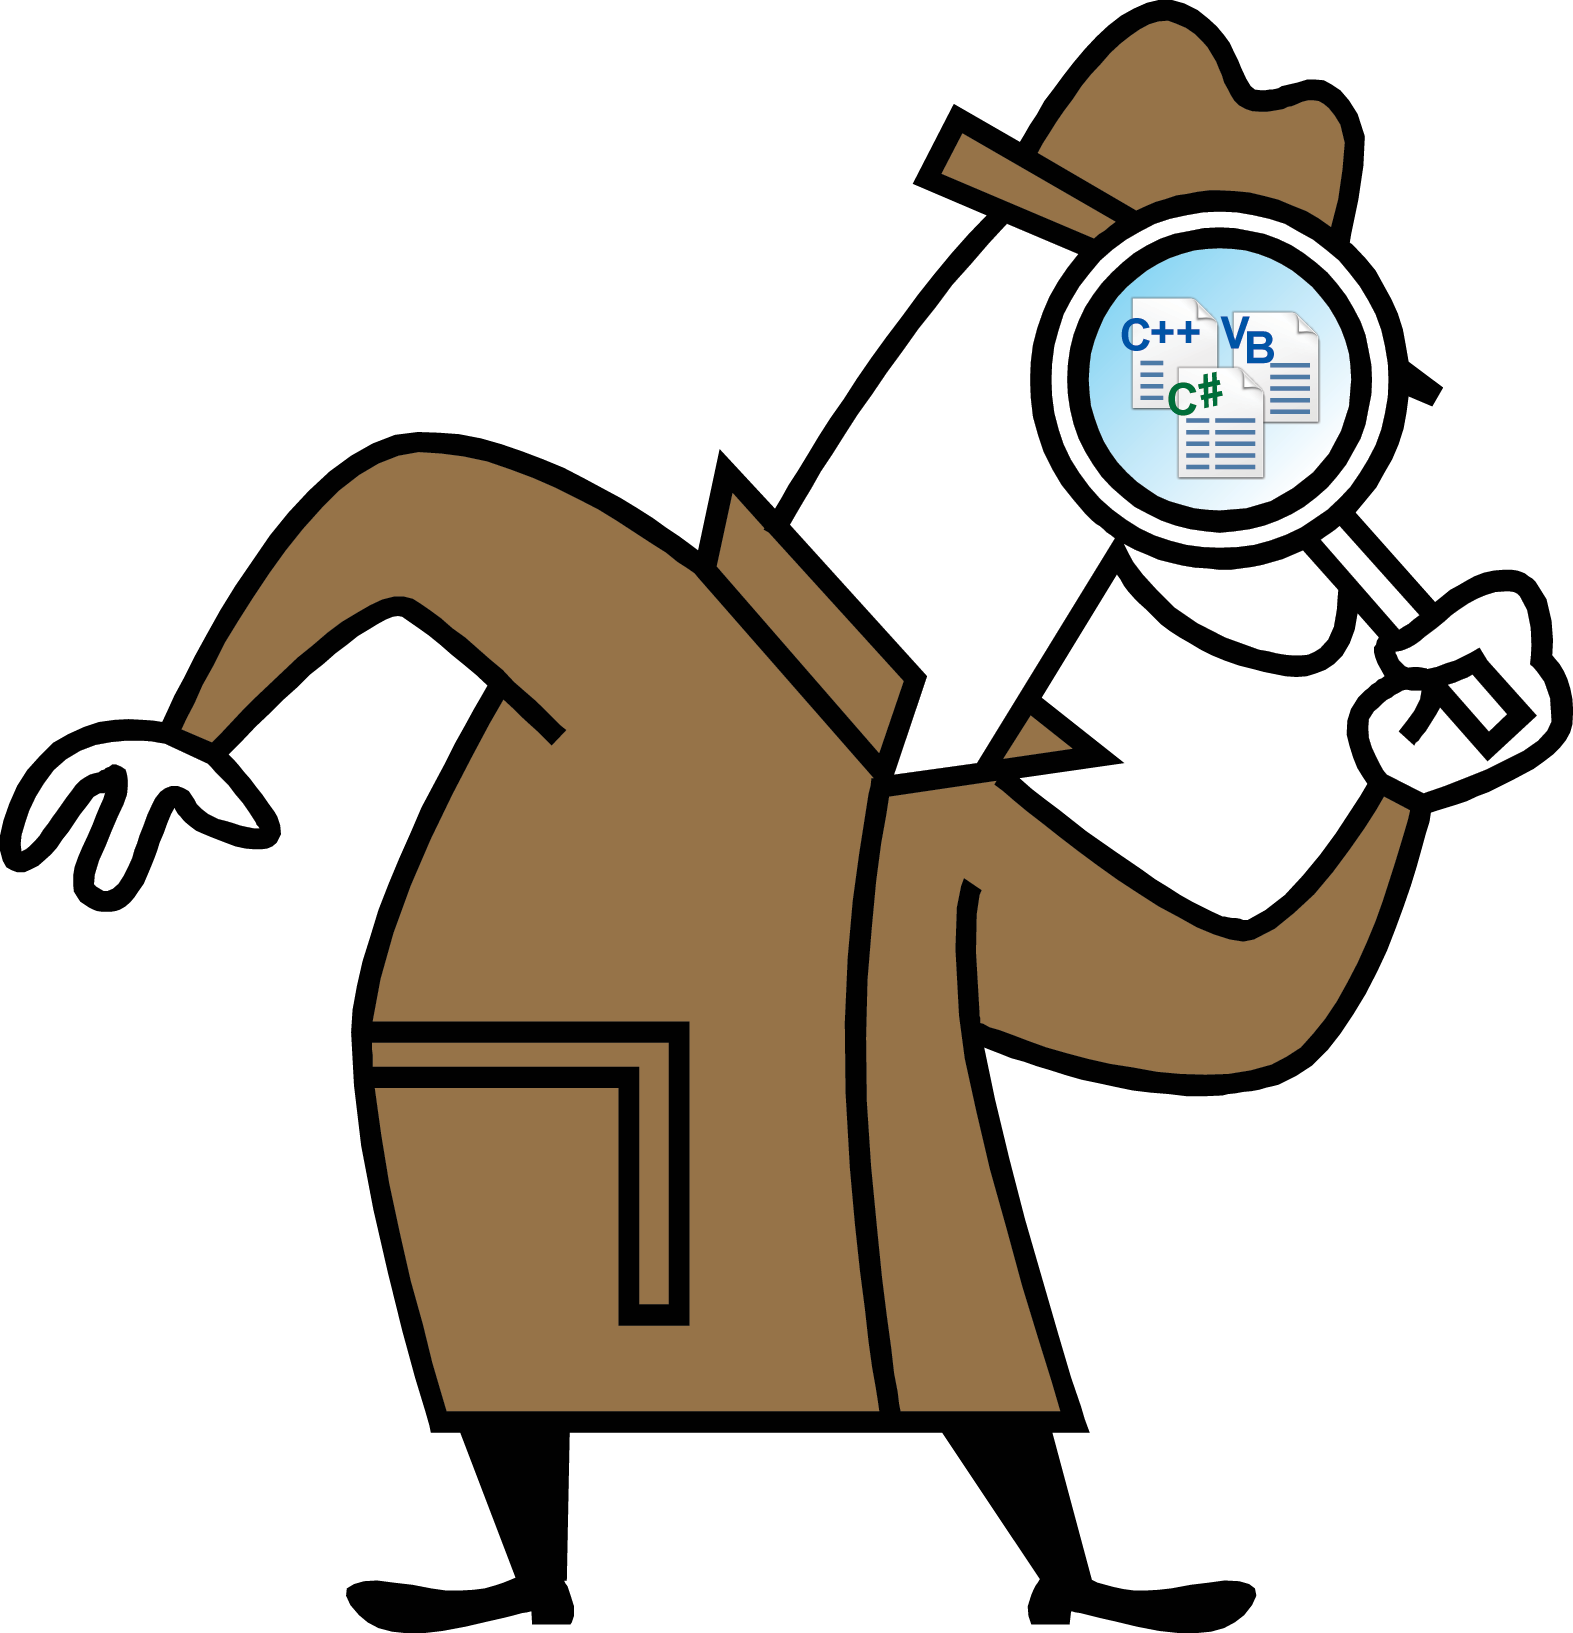 Microsoft Research - Cartoon Detective With Magnifying Glass (1573x1633)